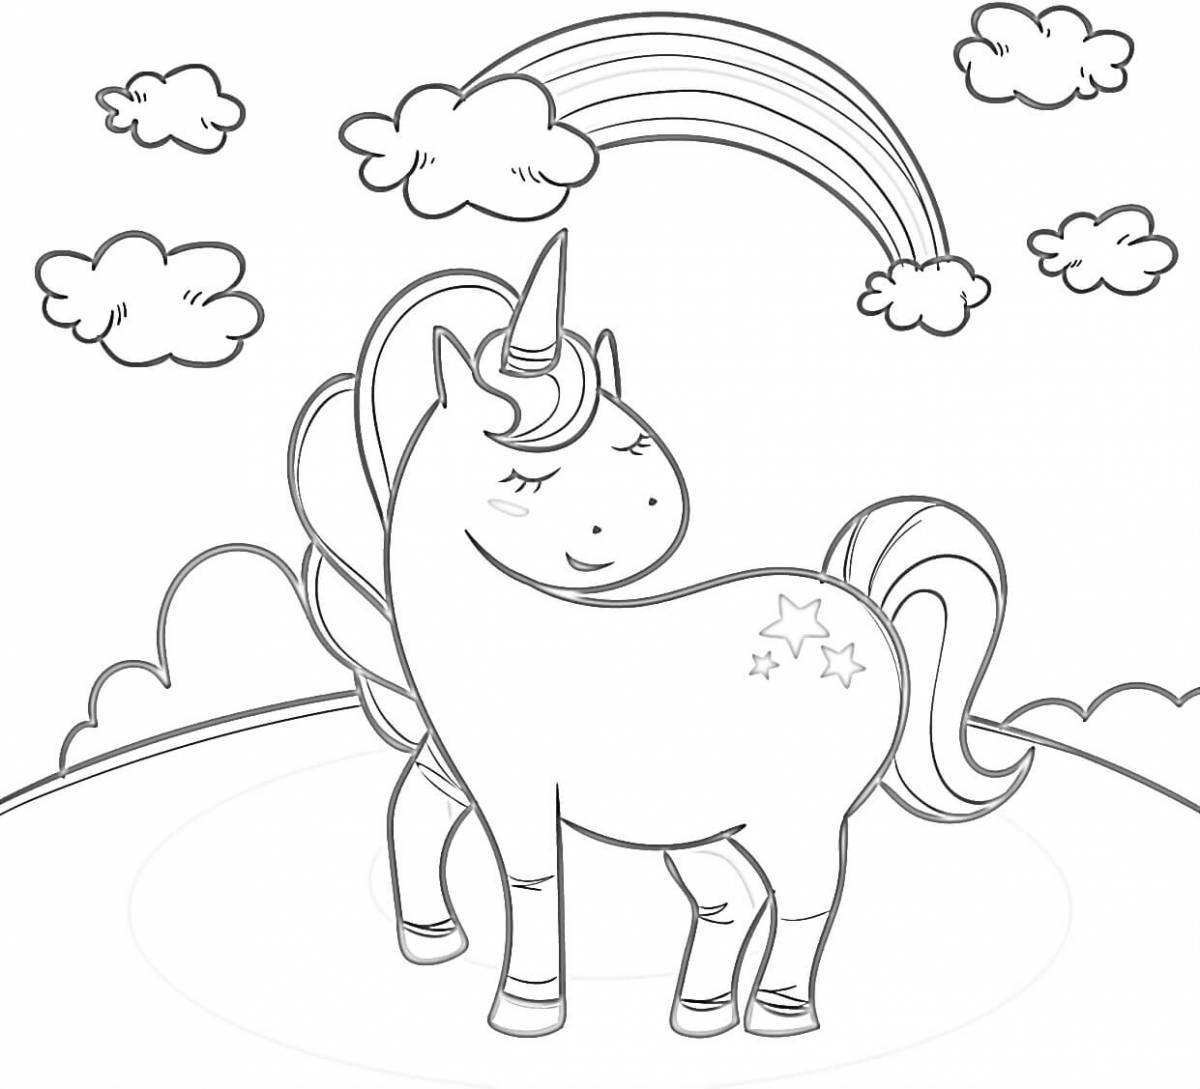 Playful unicorn coloring book for 3-4 year olds